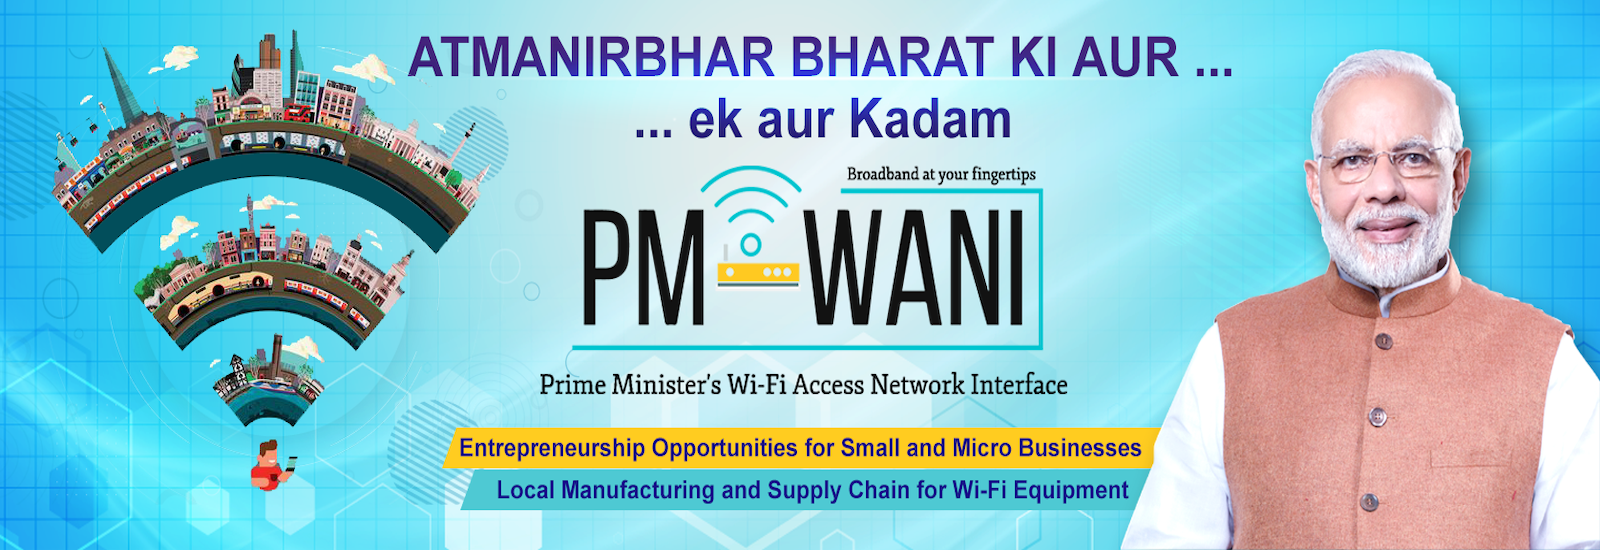 Prime Minister WiFi Access Network Interface